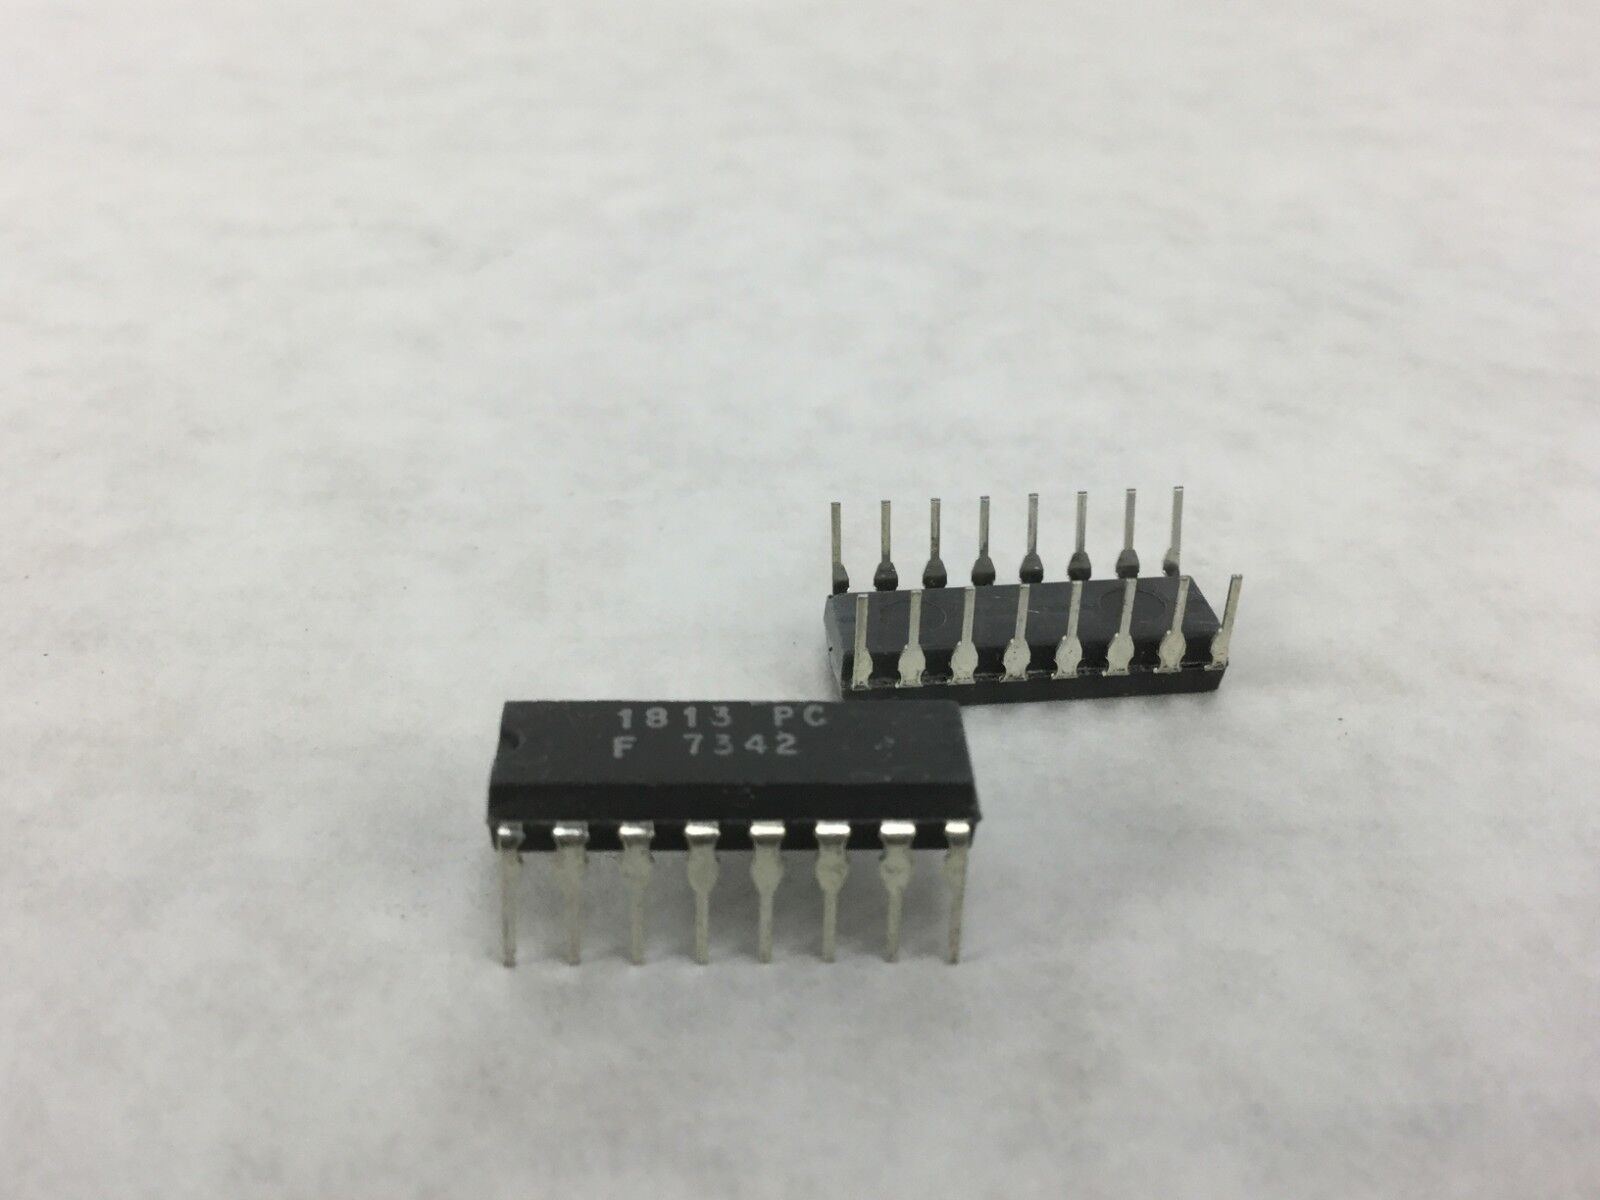 Genuine FAIRCHILD 1813 PC  F 7342 16-Pin Dip Integrated Circuit  Lot of 30